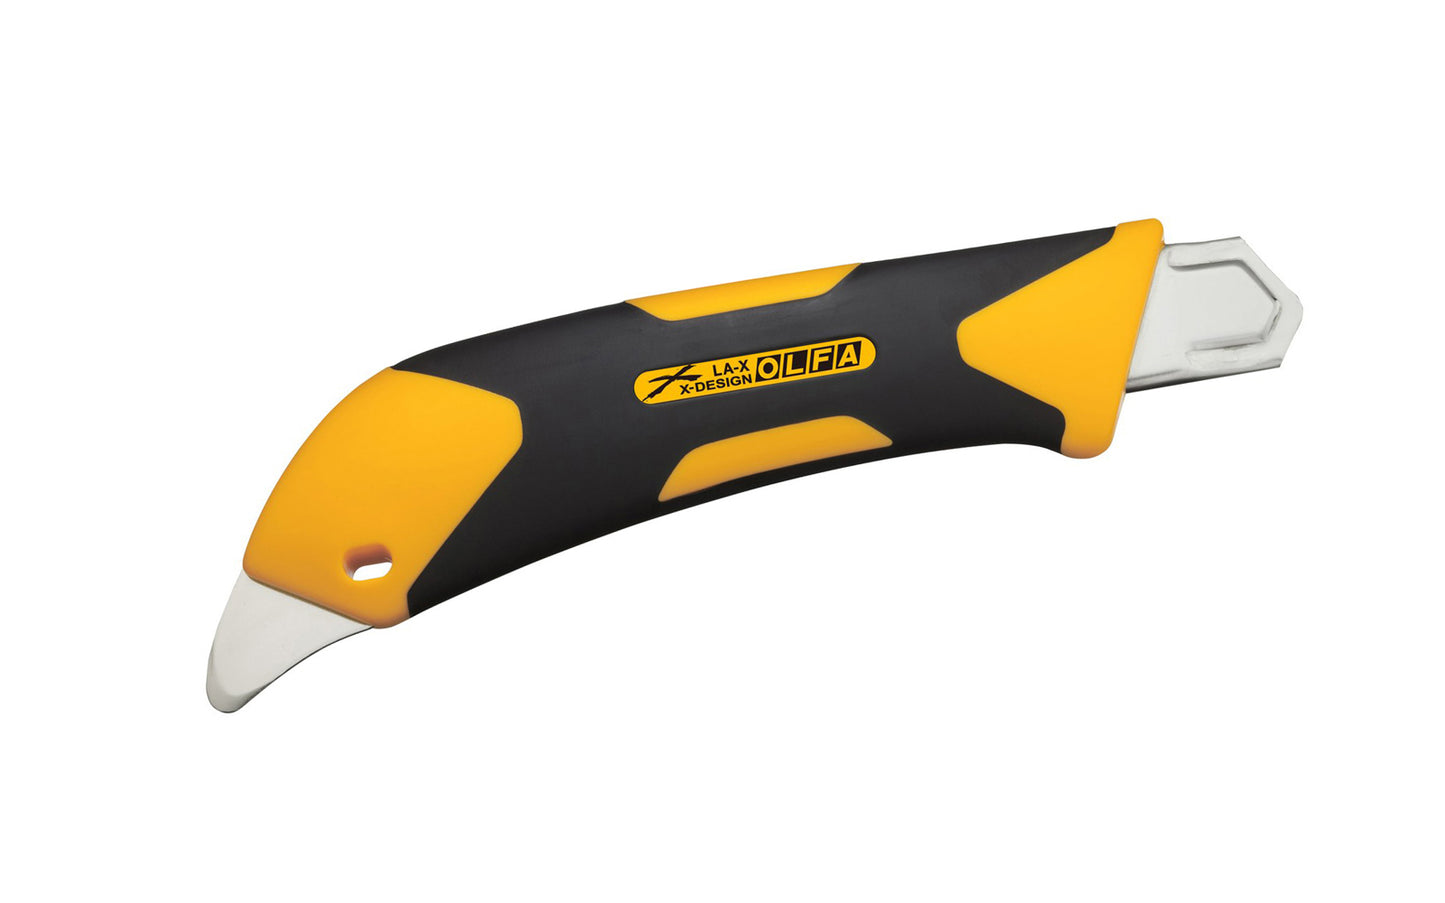 Olfa 18mm "LA-X" fiberglass utility knife with multi-pick has a LBB Heavy-Duty Ultra-Sharp Black Snap-Off Blade automatically locks firmly in place & offers a new sharp edge every time you need it. Tool-free blade change. 18 mm (3/4") wide blade. Stainless blade channel. 091511600865. Olfa Model LA-X. Made in Japan